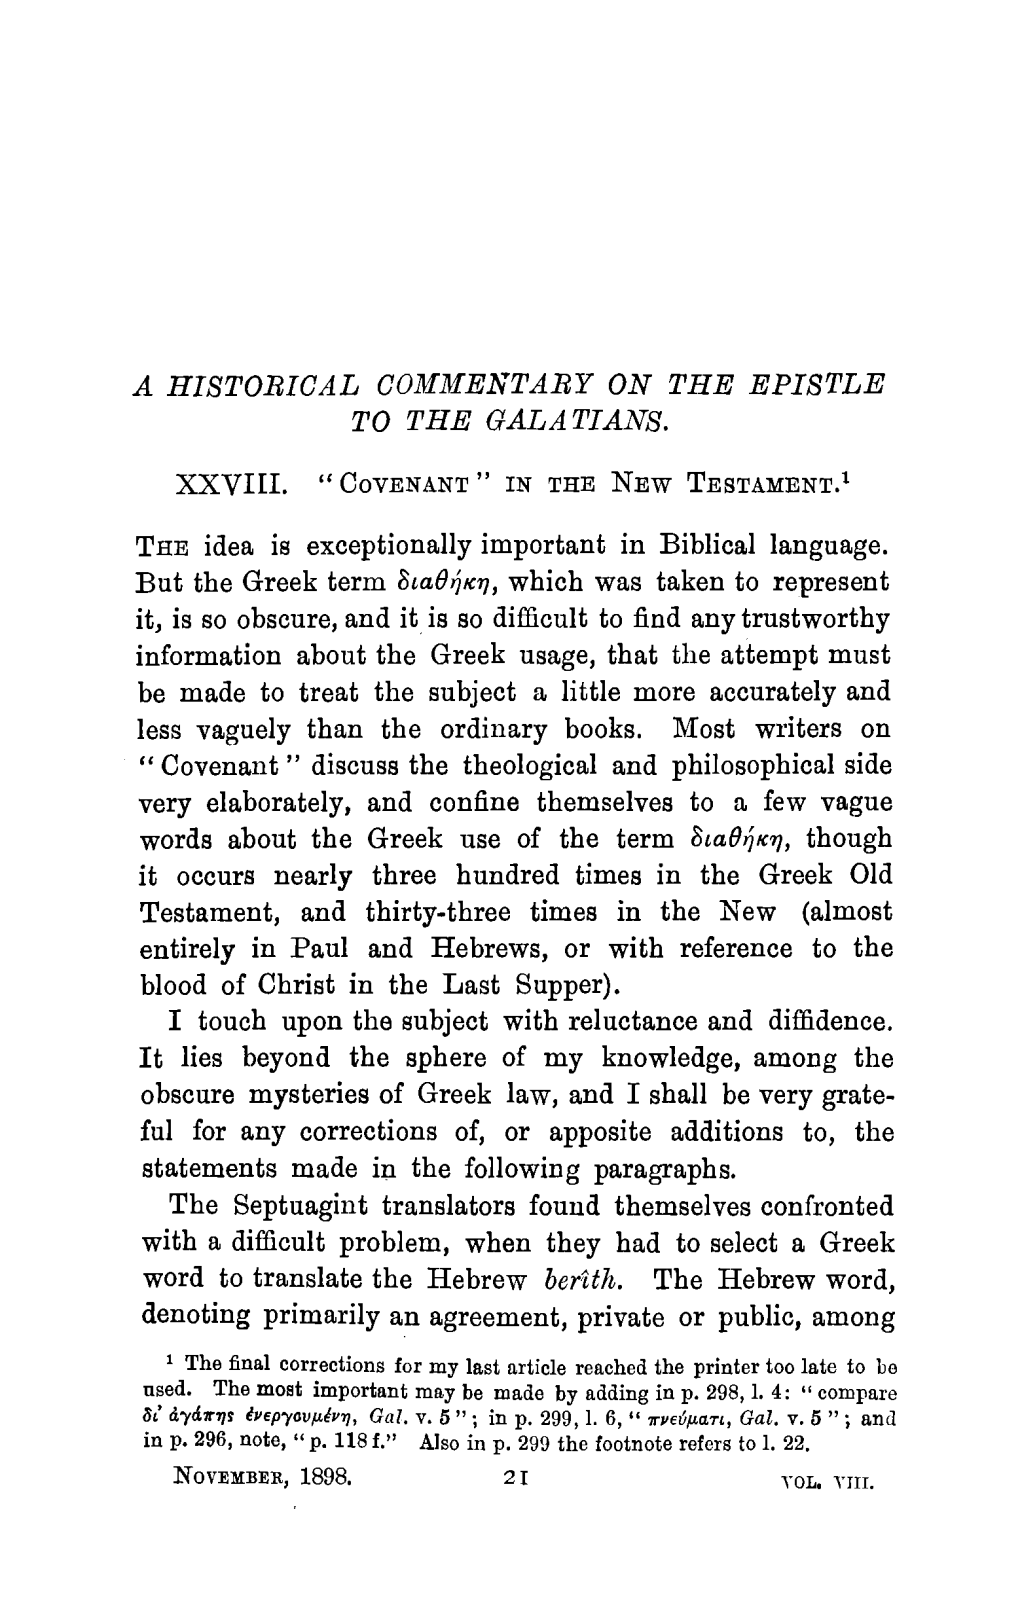 A Historical Commentary on the Epistle to the Galatians. XXVIII-XXXI